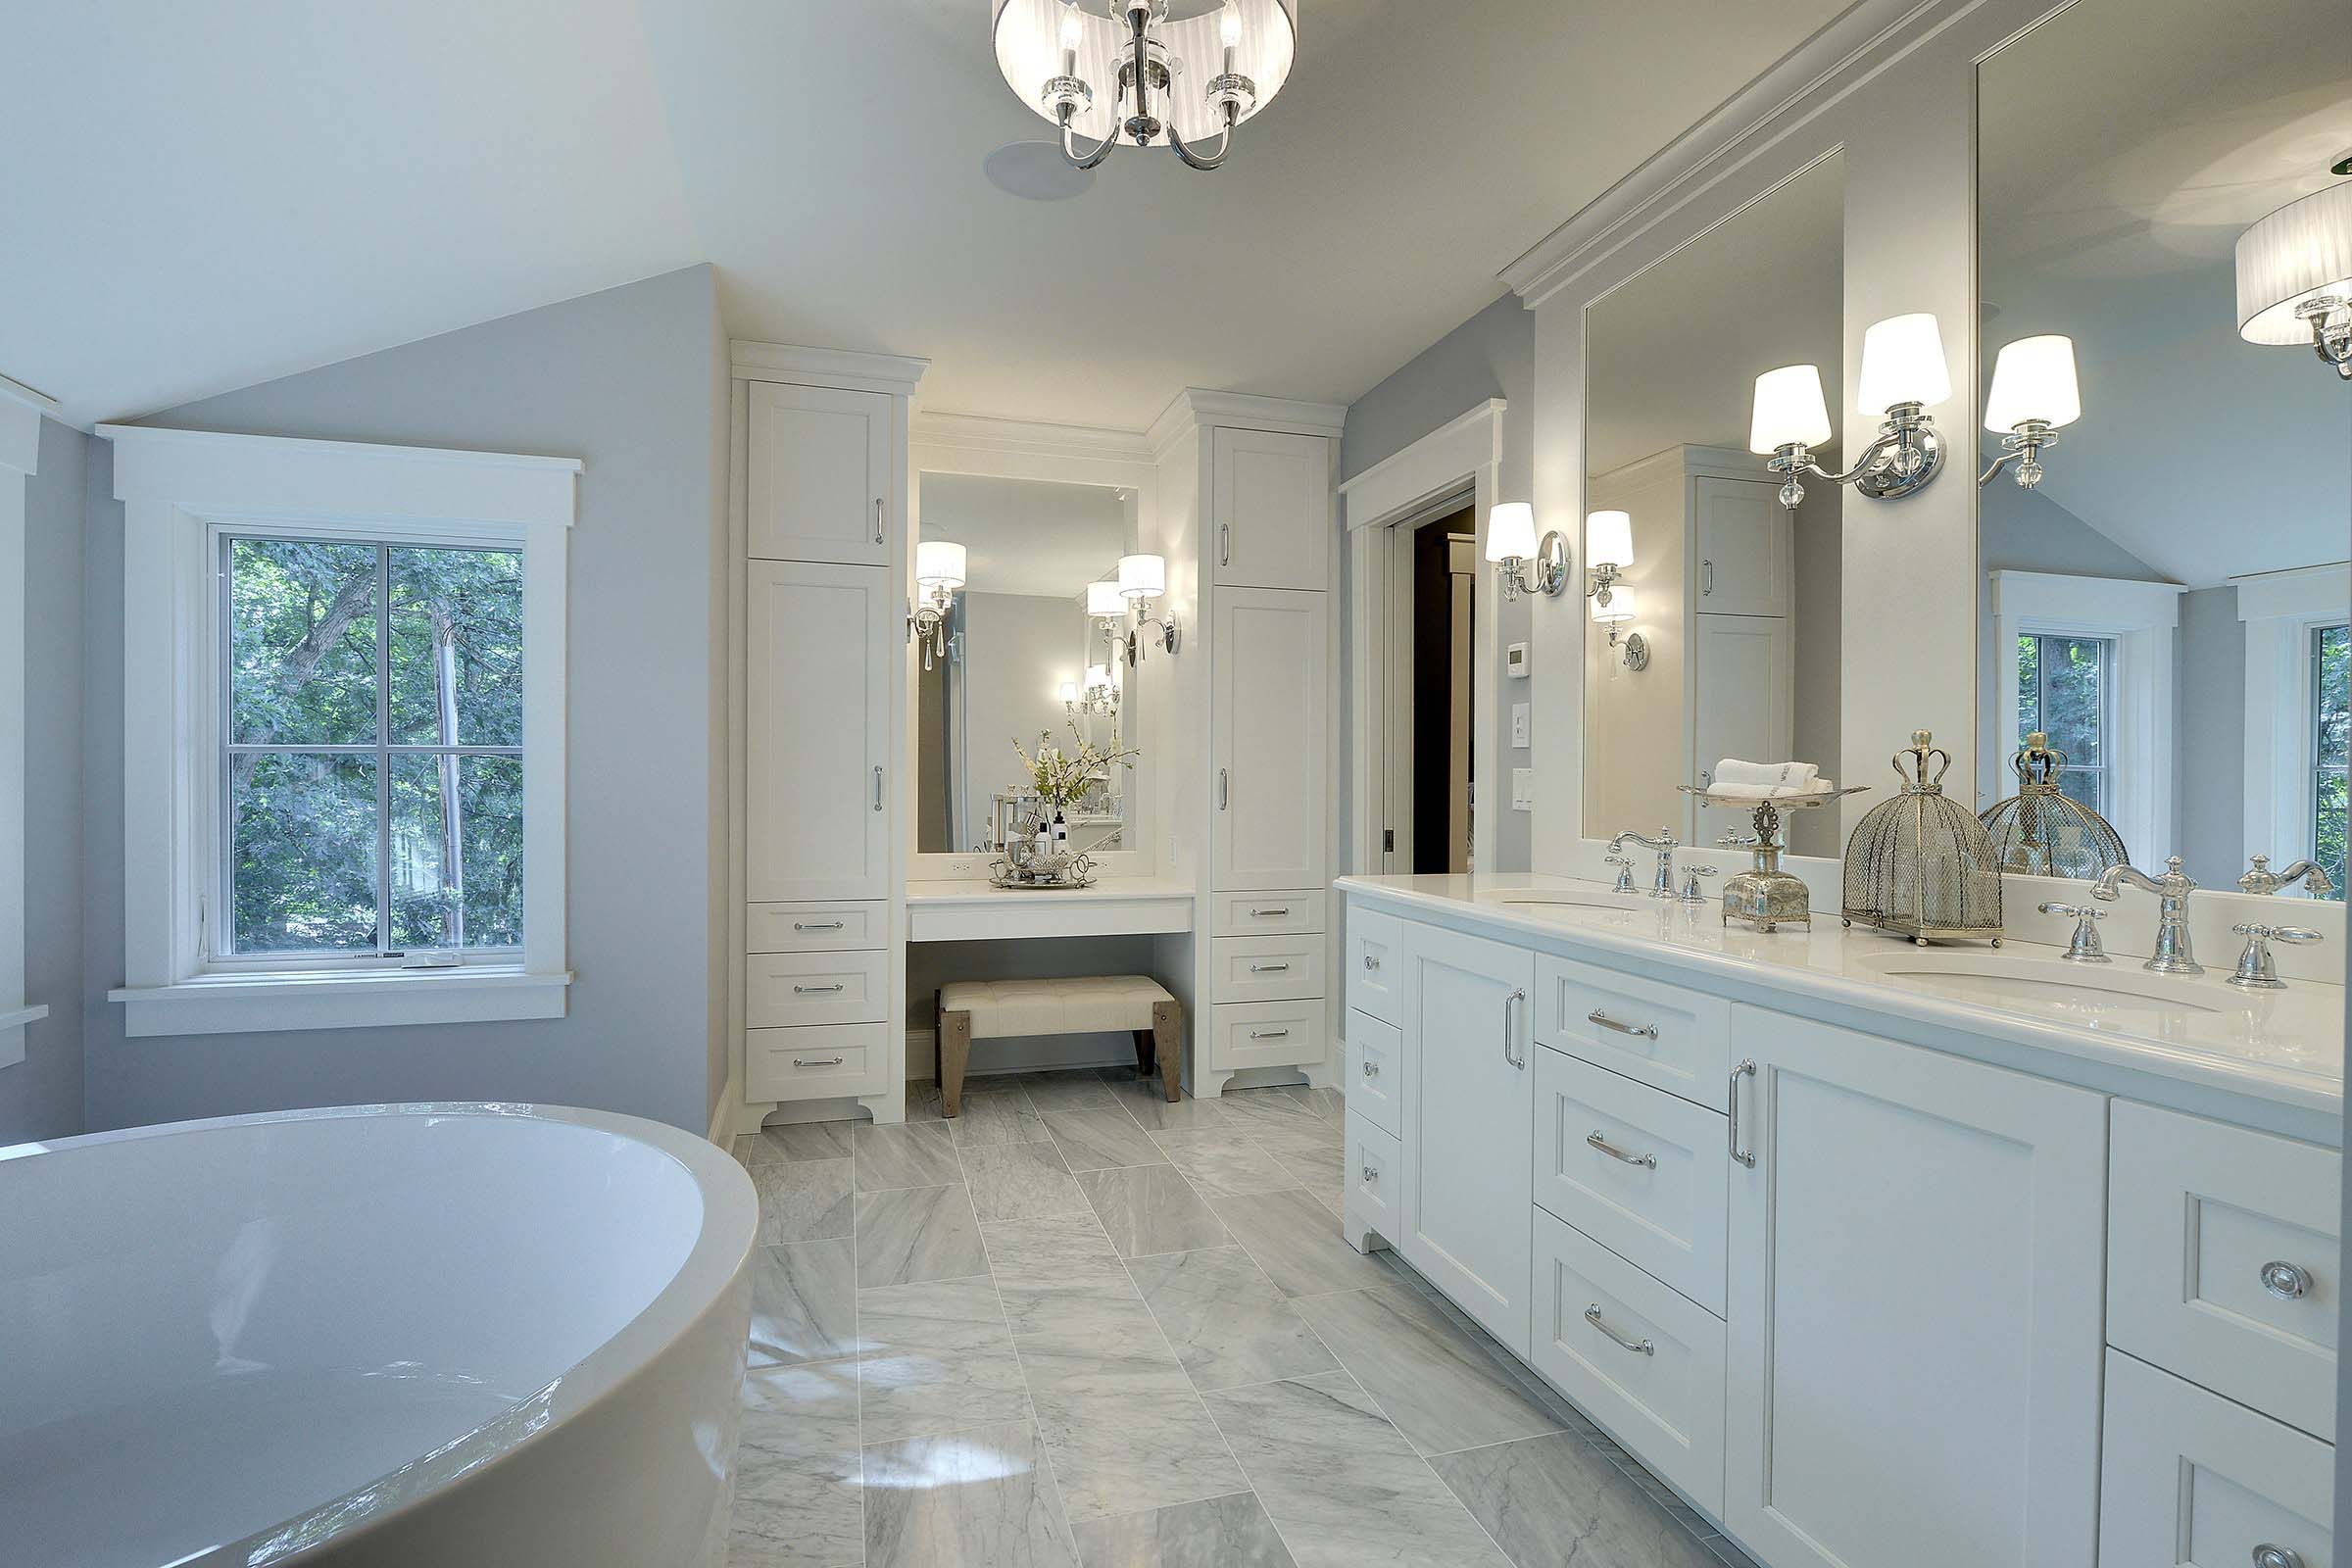 A large bathroom with white cabinets and a large tub.